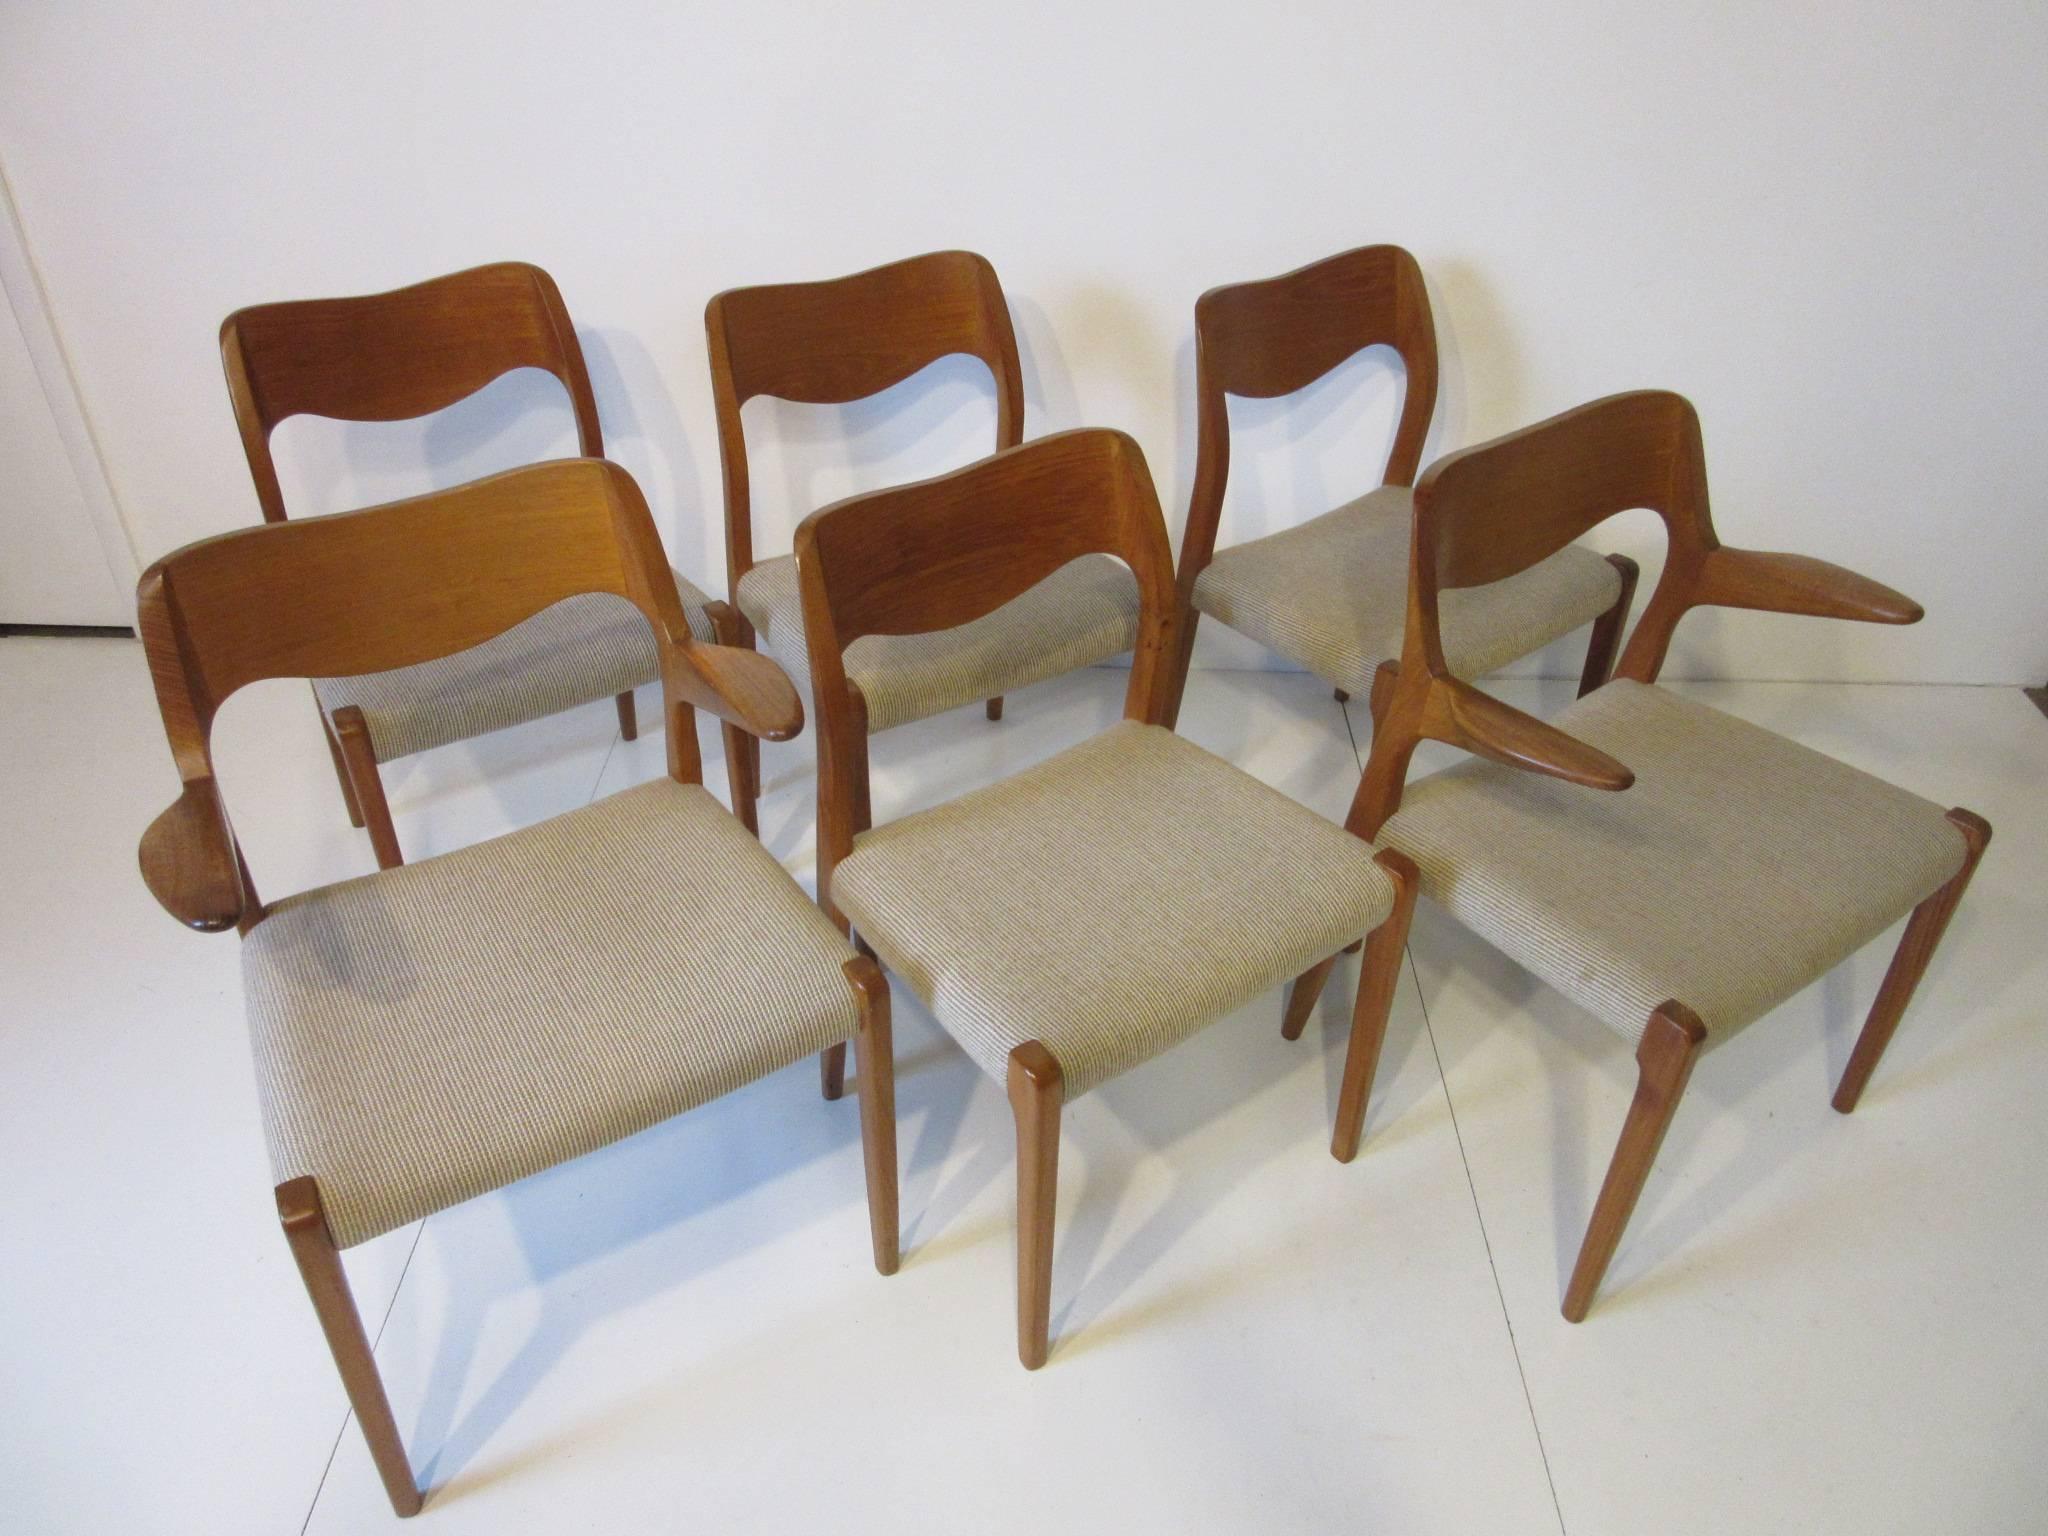 A set of six sculptural teak wood dining chairs four sides and two armchairs with upholstered seats. Comfortable and stylish they fit with almost any decor, retains the original labels and branded manufactures mark crafted by Hojbjerg Mobler made in